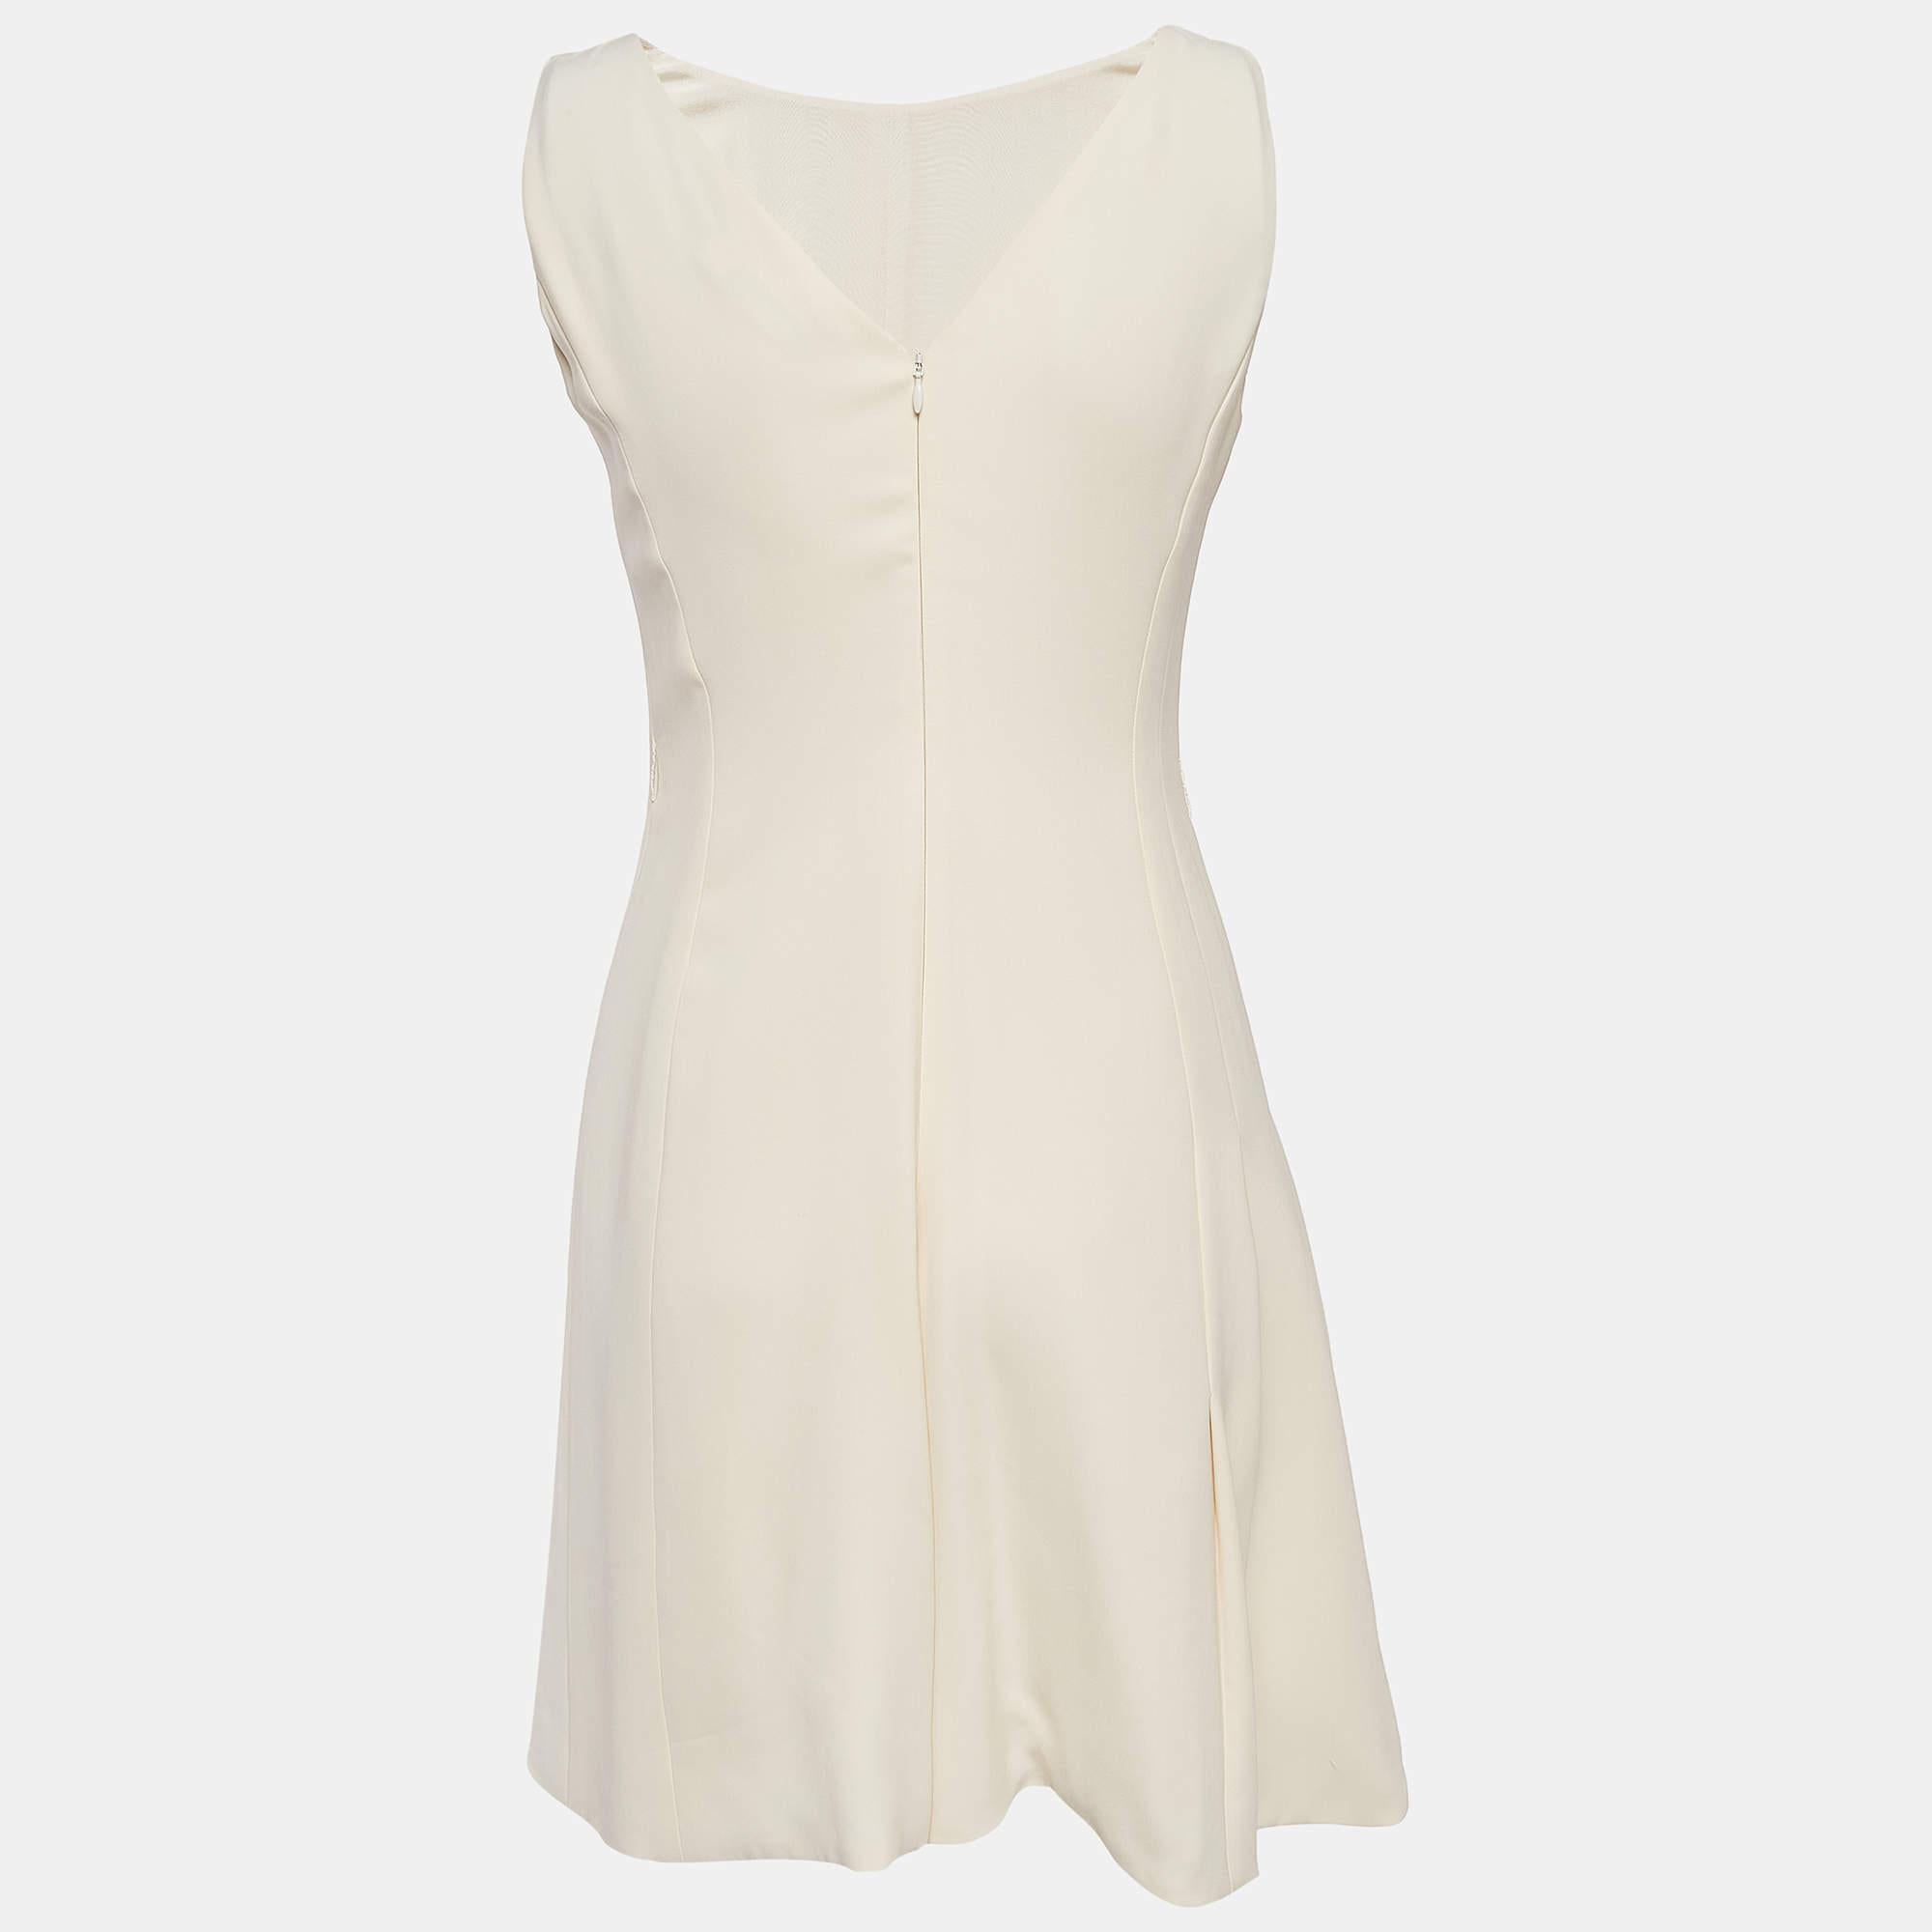 Experience effortless chic with the Christian Dior playsuit. Crafted with meticulous attention to detail, this playsuit features a luxurious cream silk fabric and sophisticated paneled design, exuding timeless style. Perfect for any occasion, it